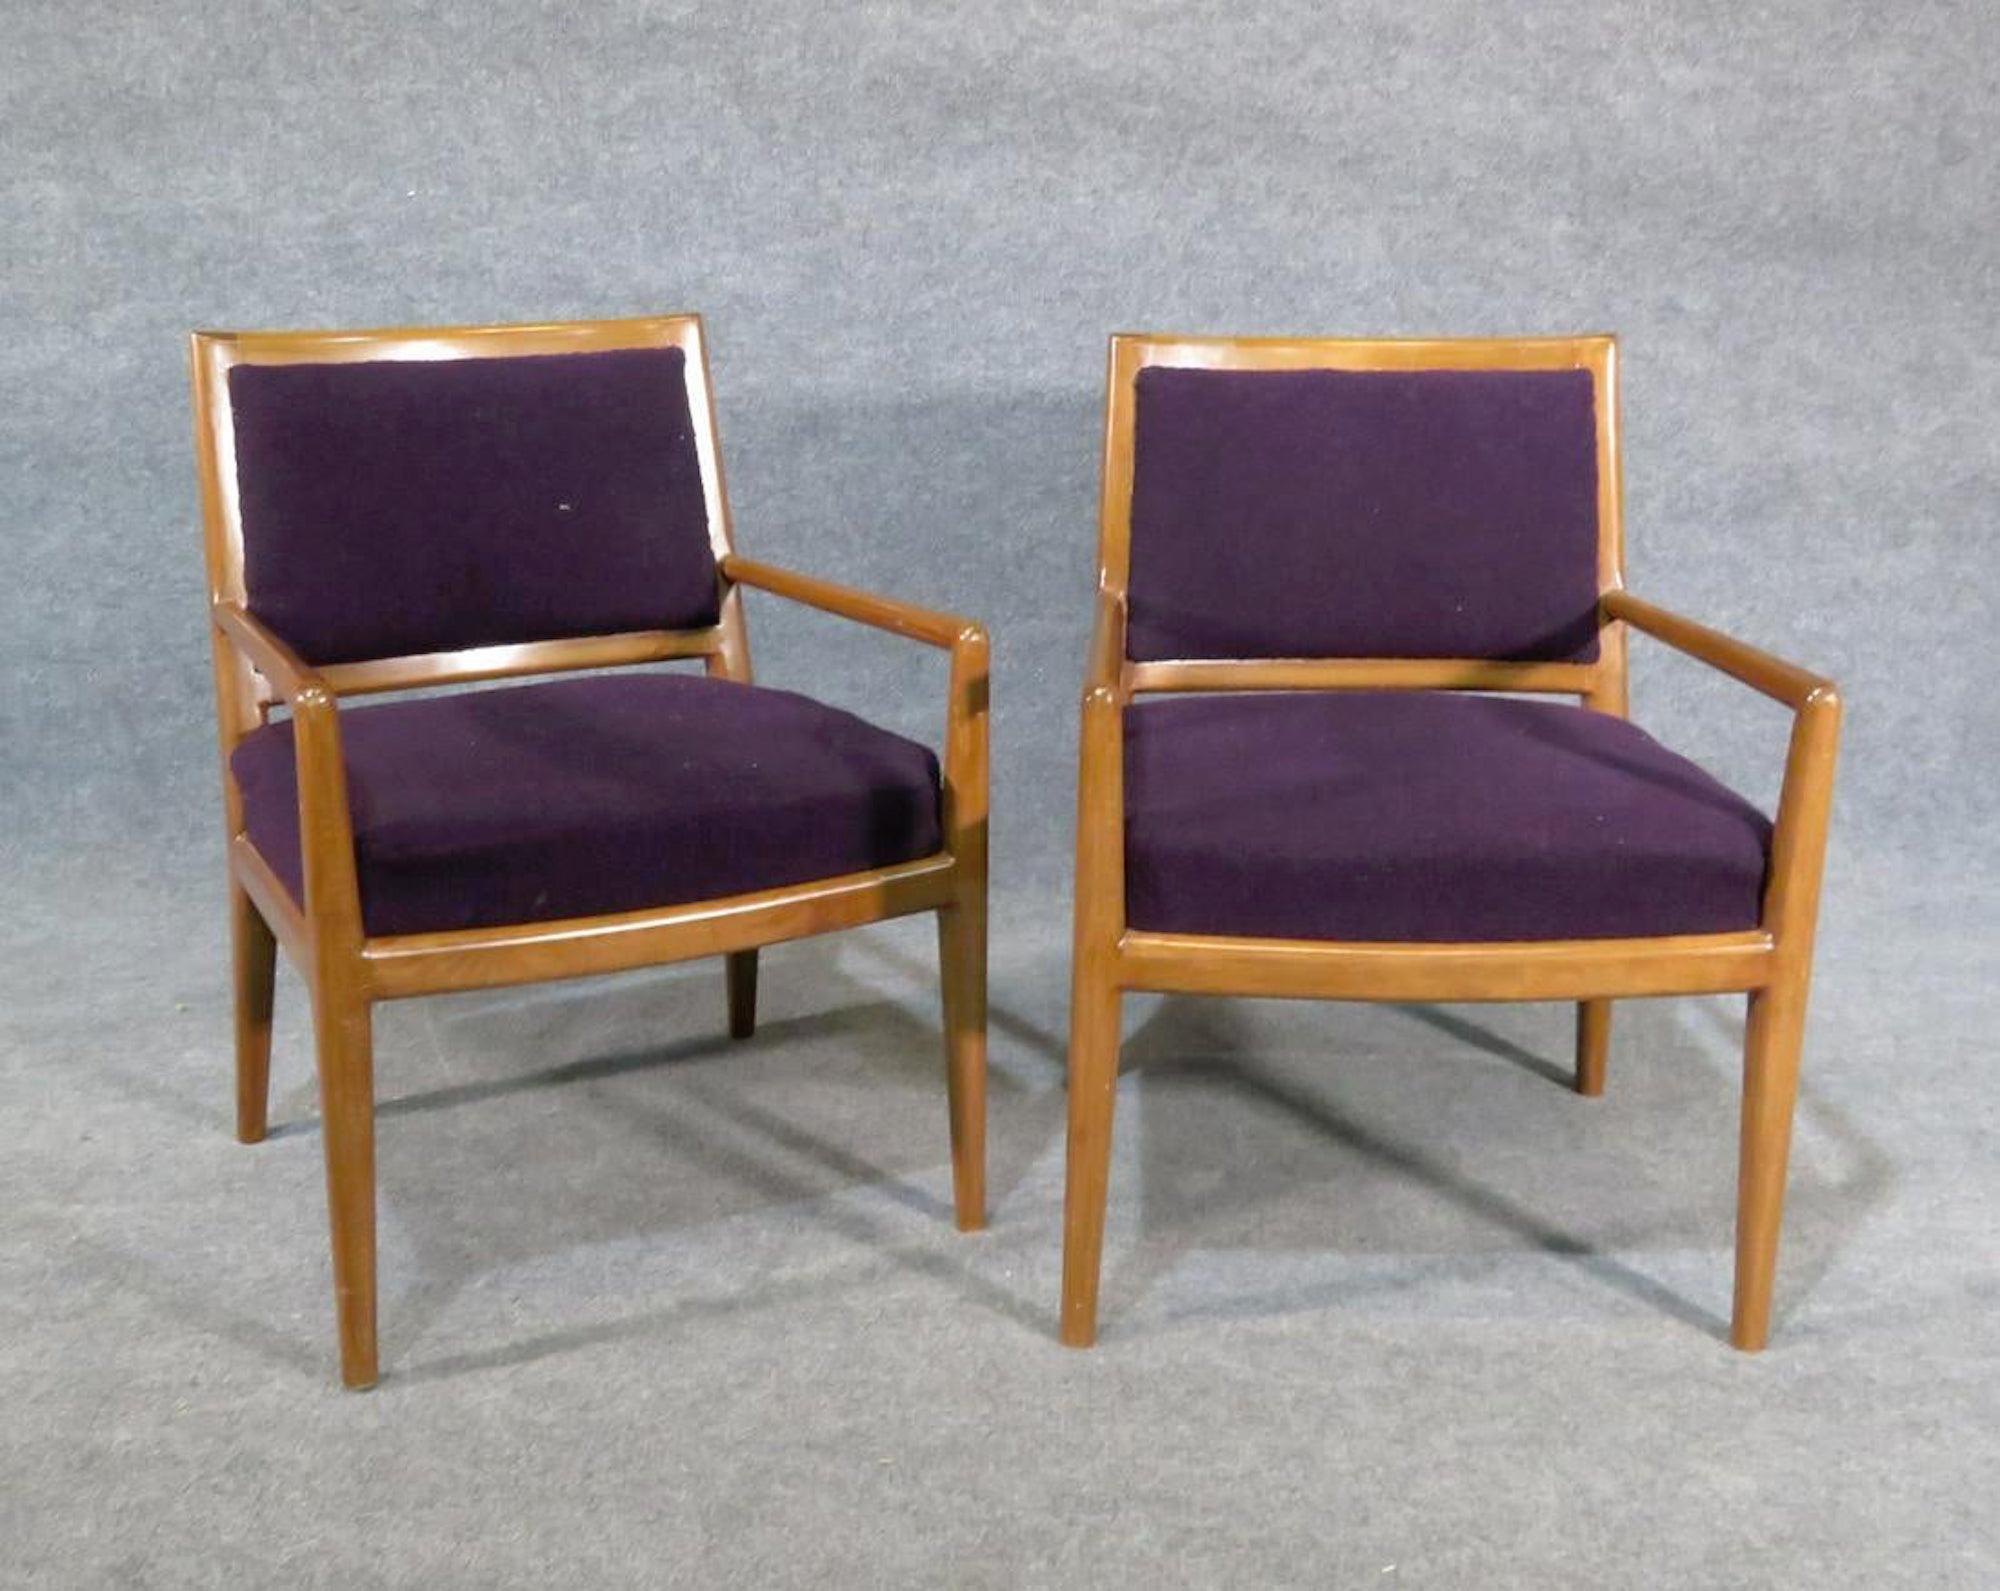 Mid-Century Modern style wood frame chairs in the style of John Widdicomb.
(Please confirm item location - NY or NJ - with dealer).
  